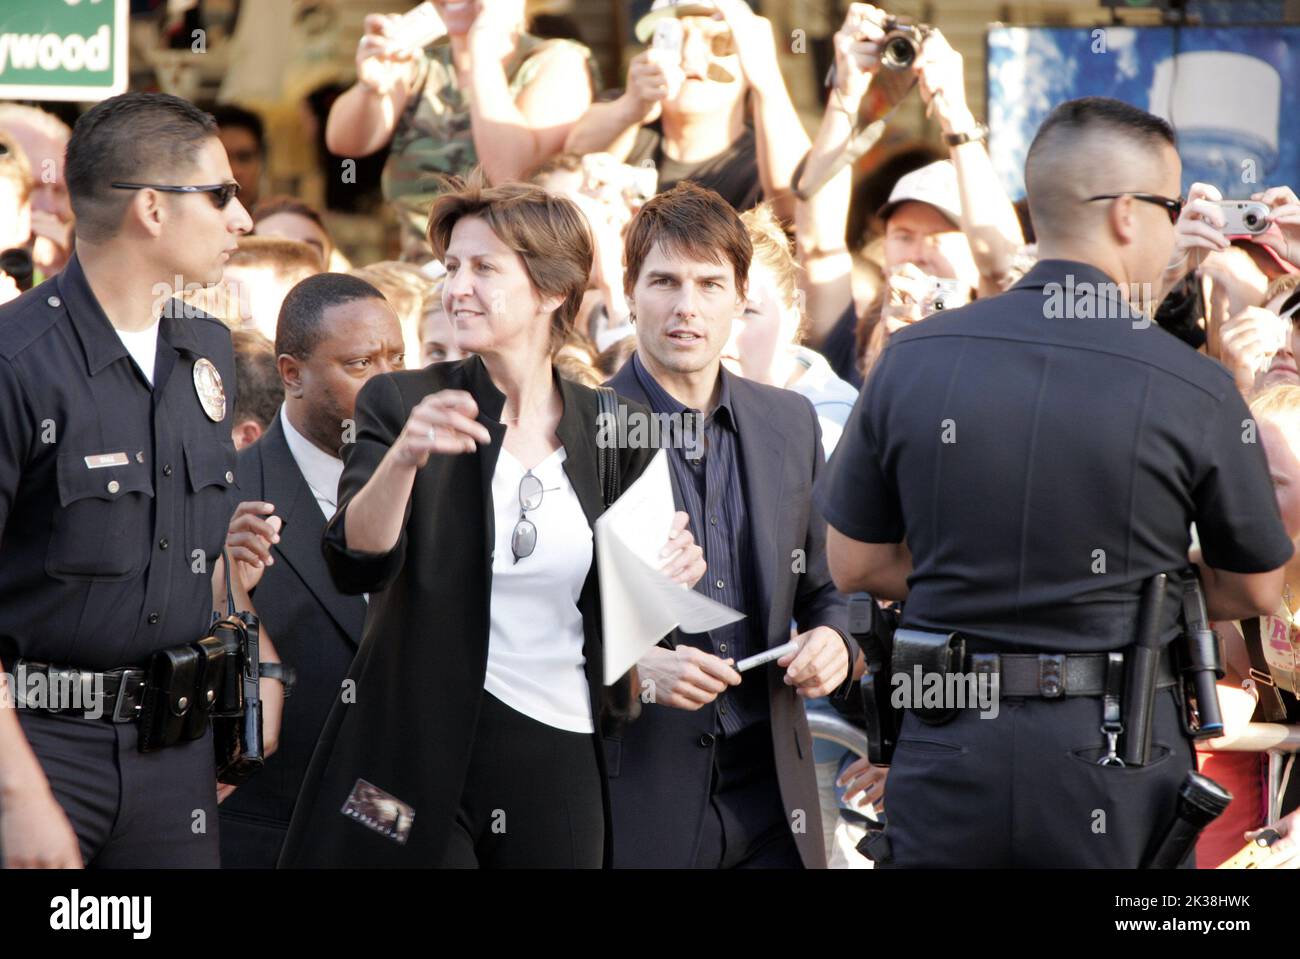 TOM CRUISE & LEANNE ACTOR & SISTER BATMAN BEGINS CHINESE THEATRE, HOLLYWOOD LOS ANGELES, USA 06/06/2005 LAM51635 Stock Photo